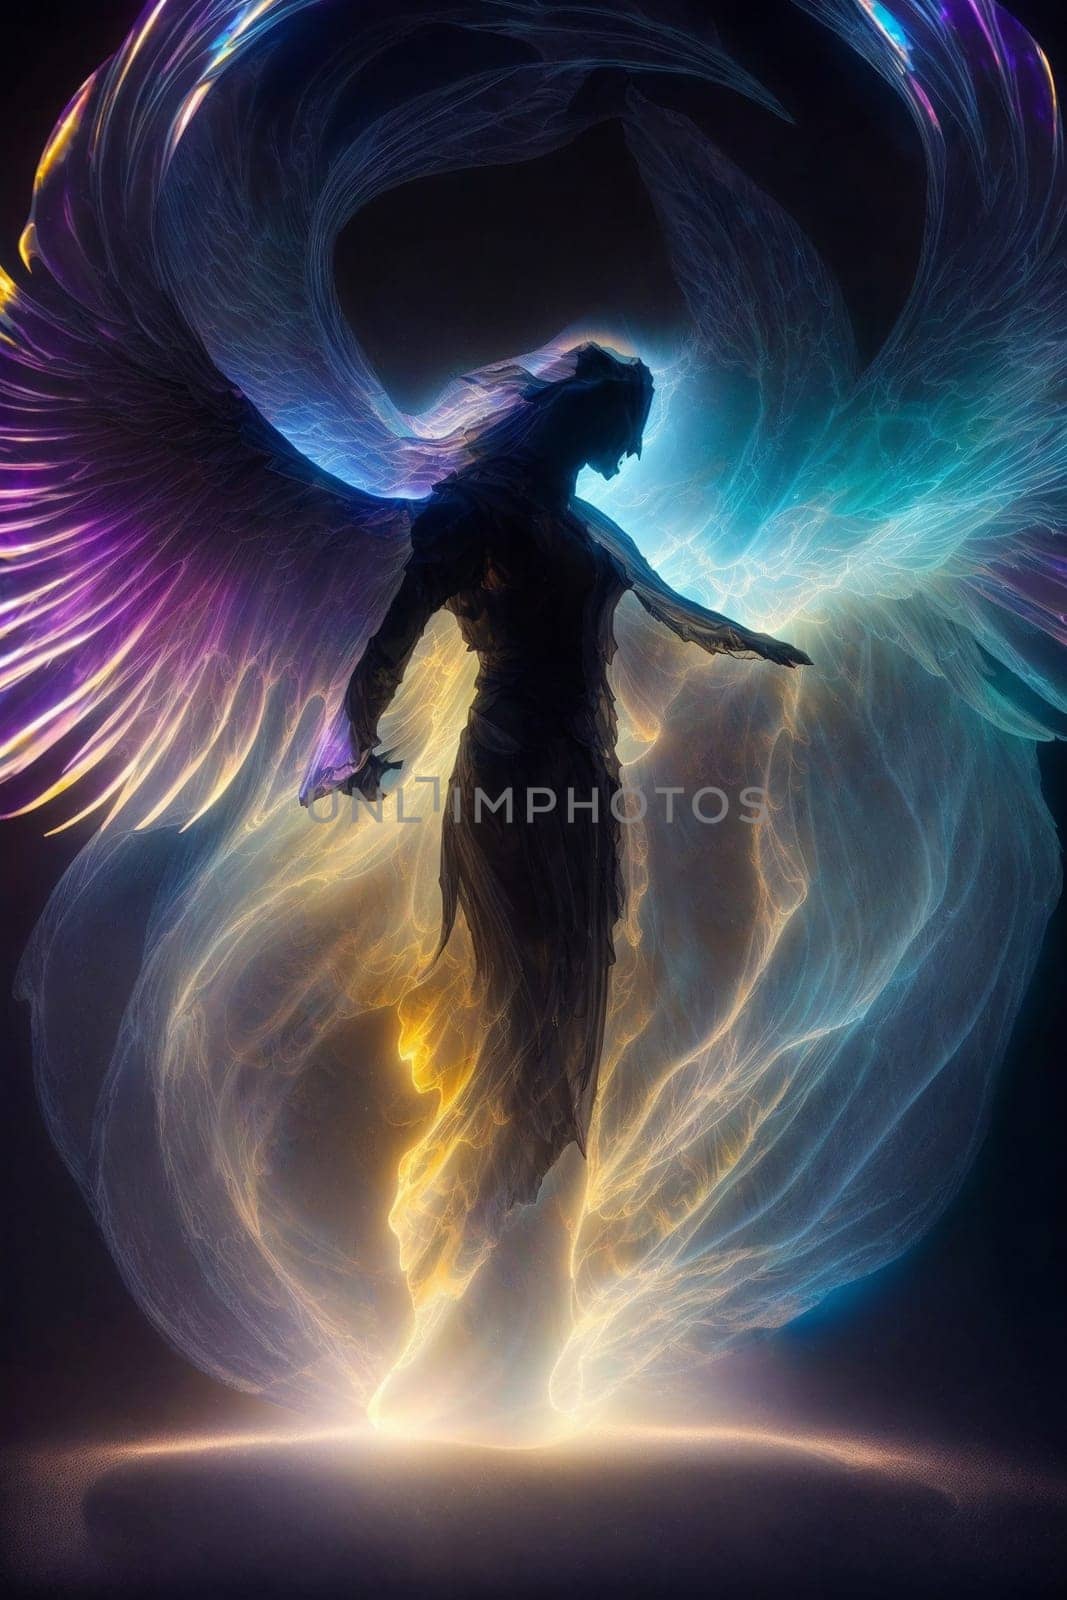 A person with wings stands confidently in front of a bright light, showcasing their unique ability.